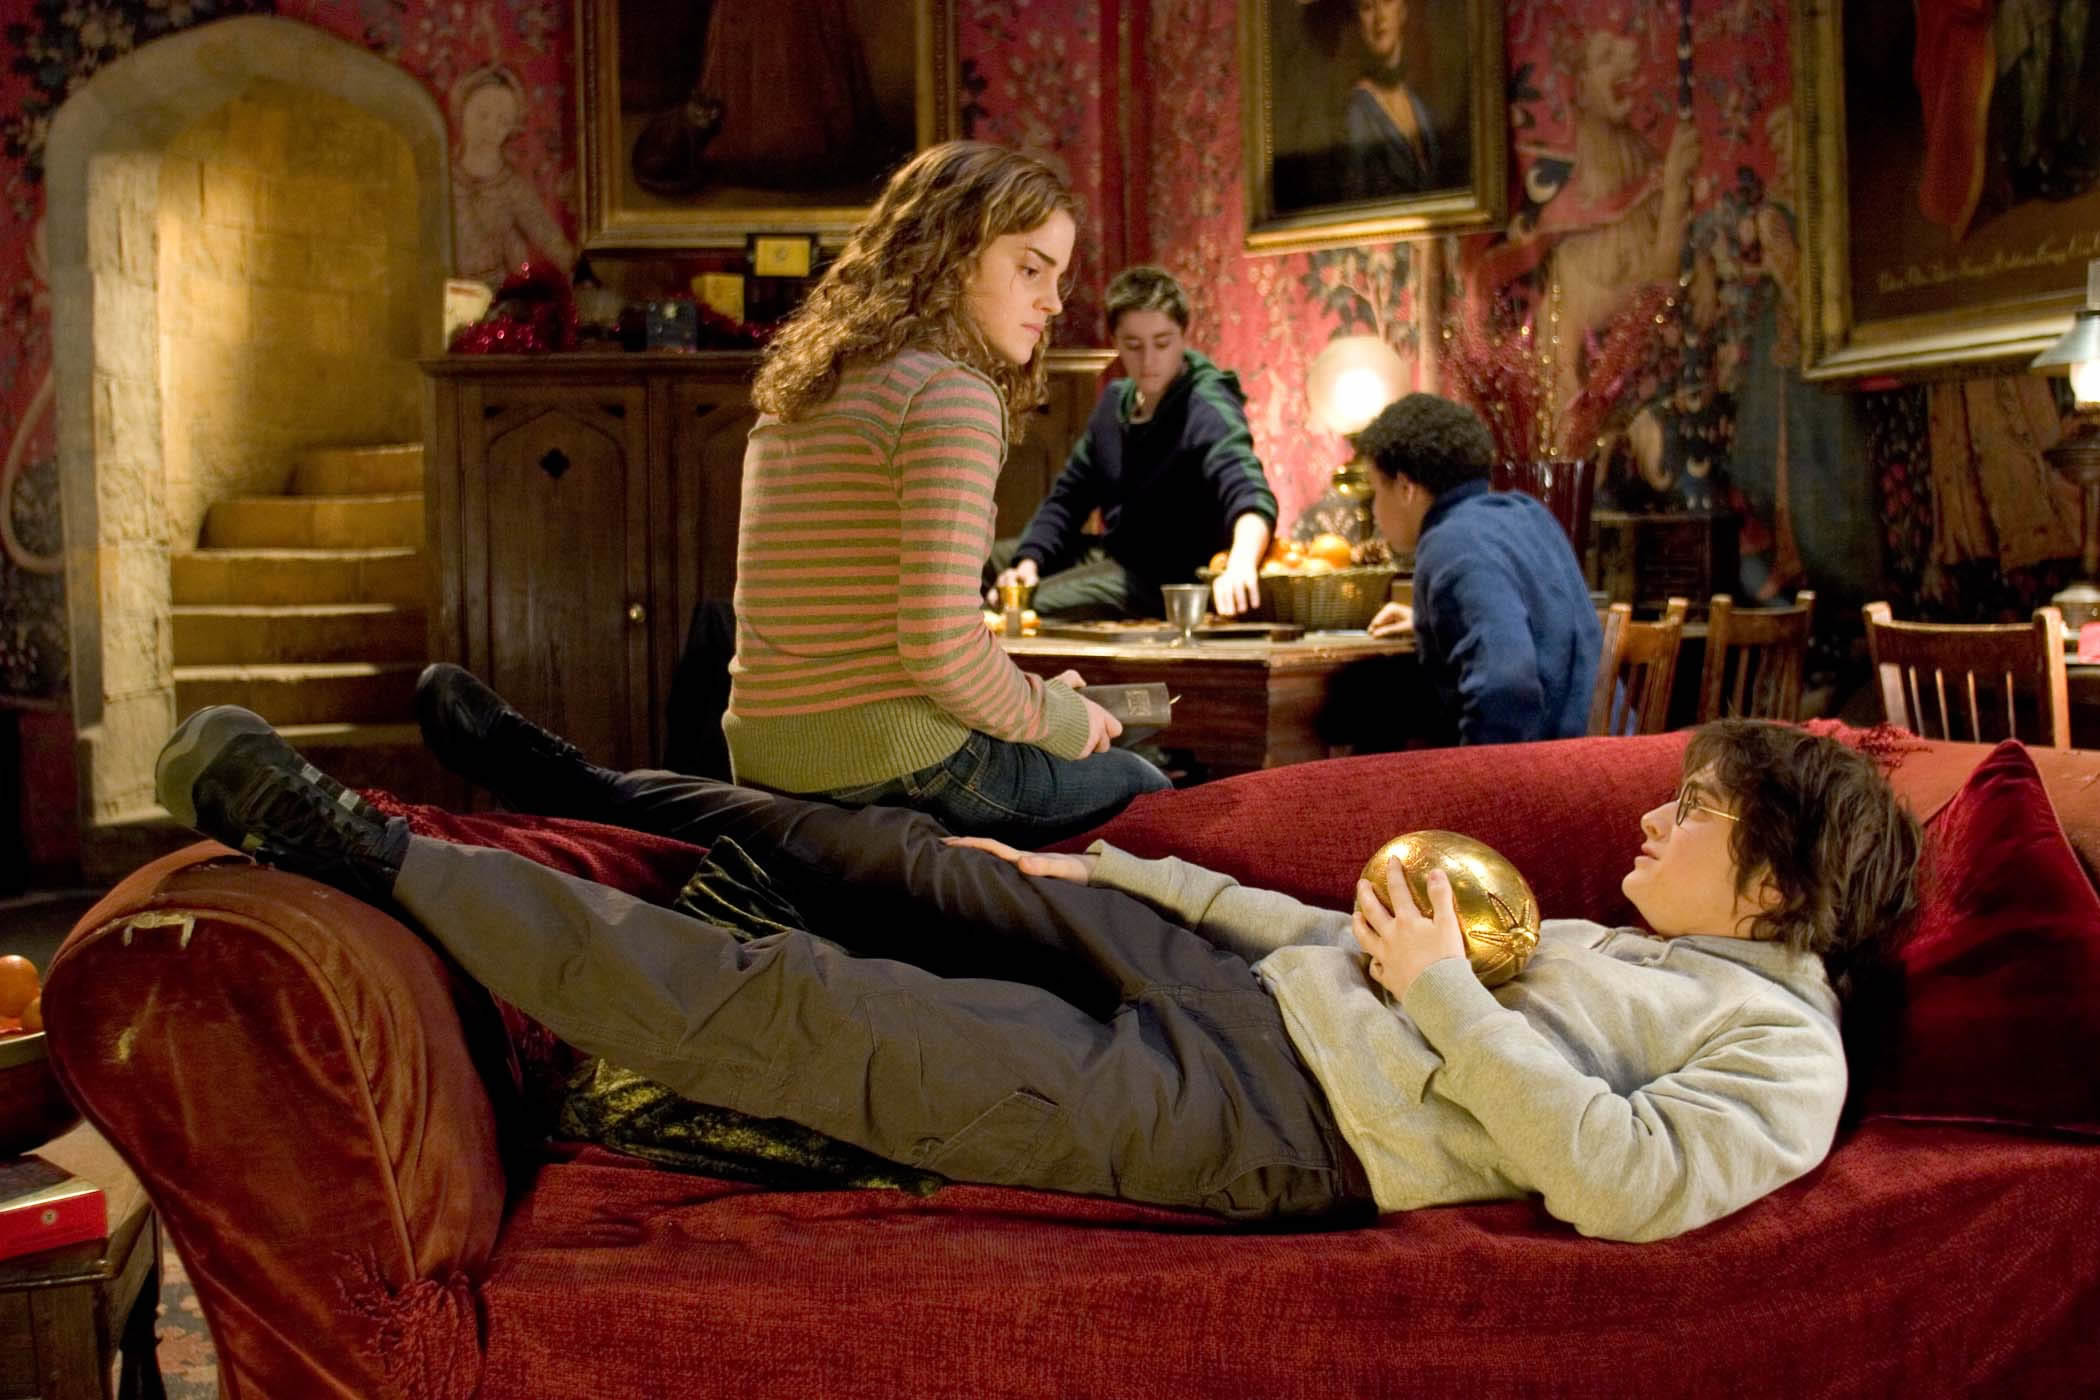 2100x1400 Tumblr_mwtx268xki1qc17ifo4_r1_250 Hermione and Harry in the Gryffindor  common room GryffindorDormitory Gryffindor_common_room  Gryffindor_Common_Room ...